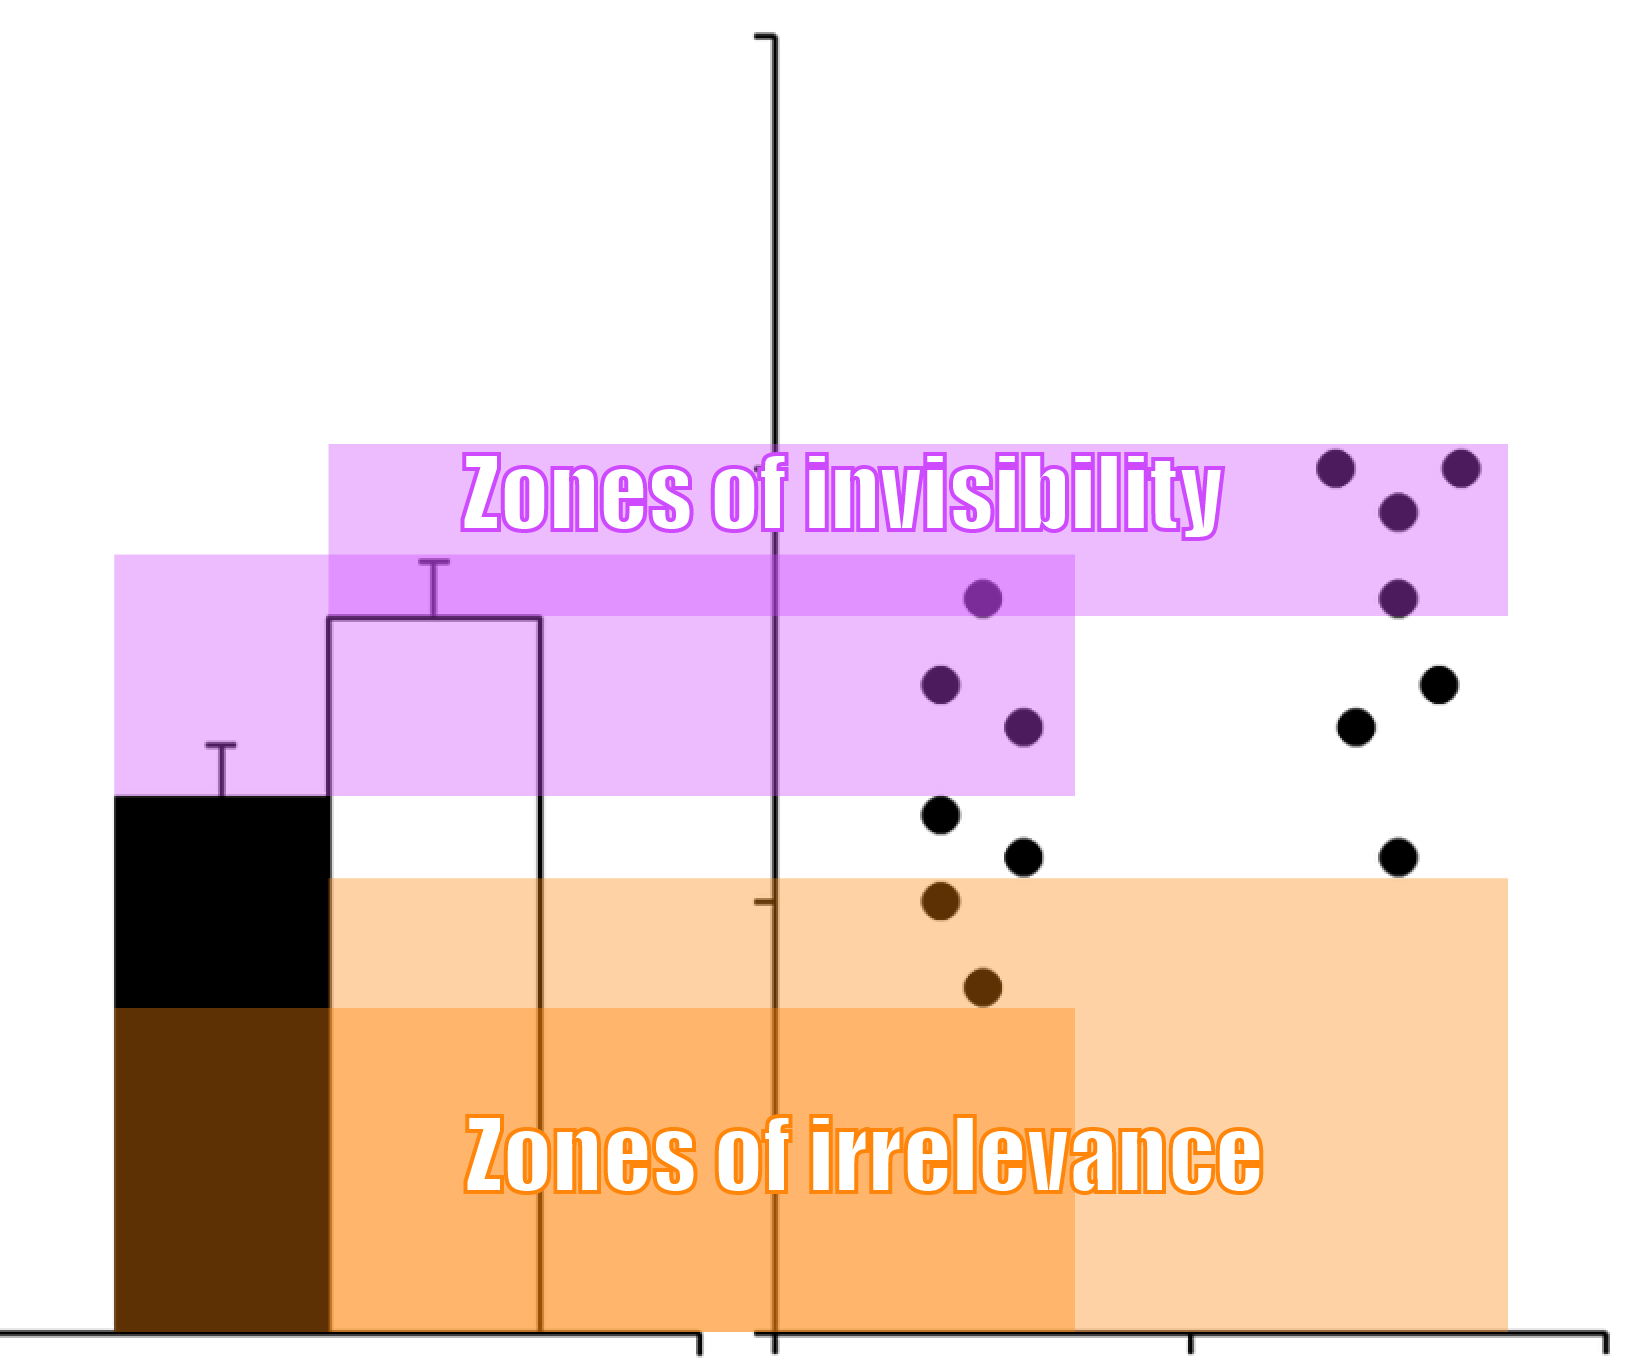 The same graphic as above, but with labels added for the 'Zones of invisibility' and the 'Zones of irrelevance'